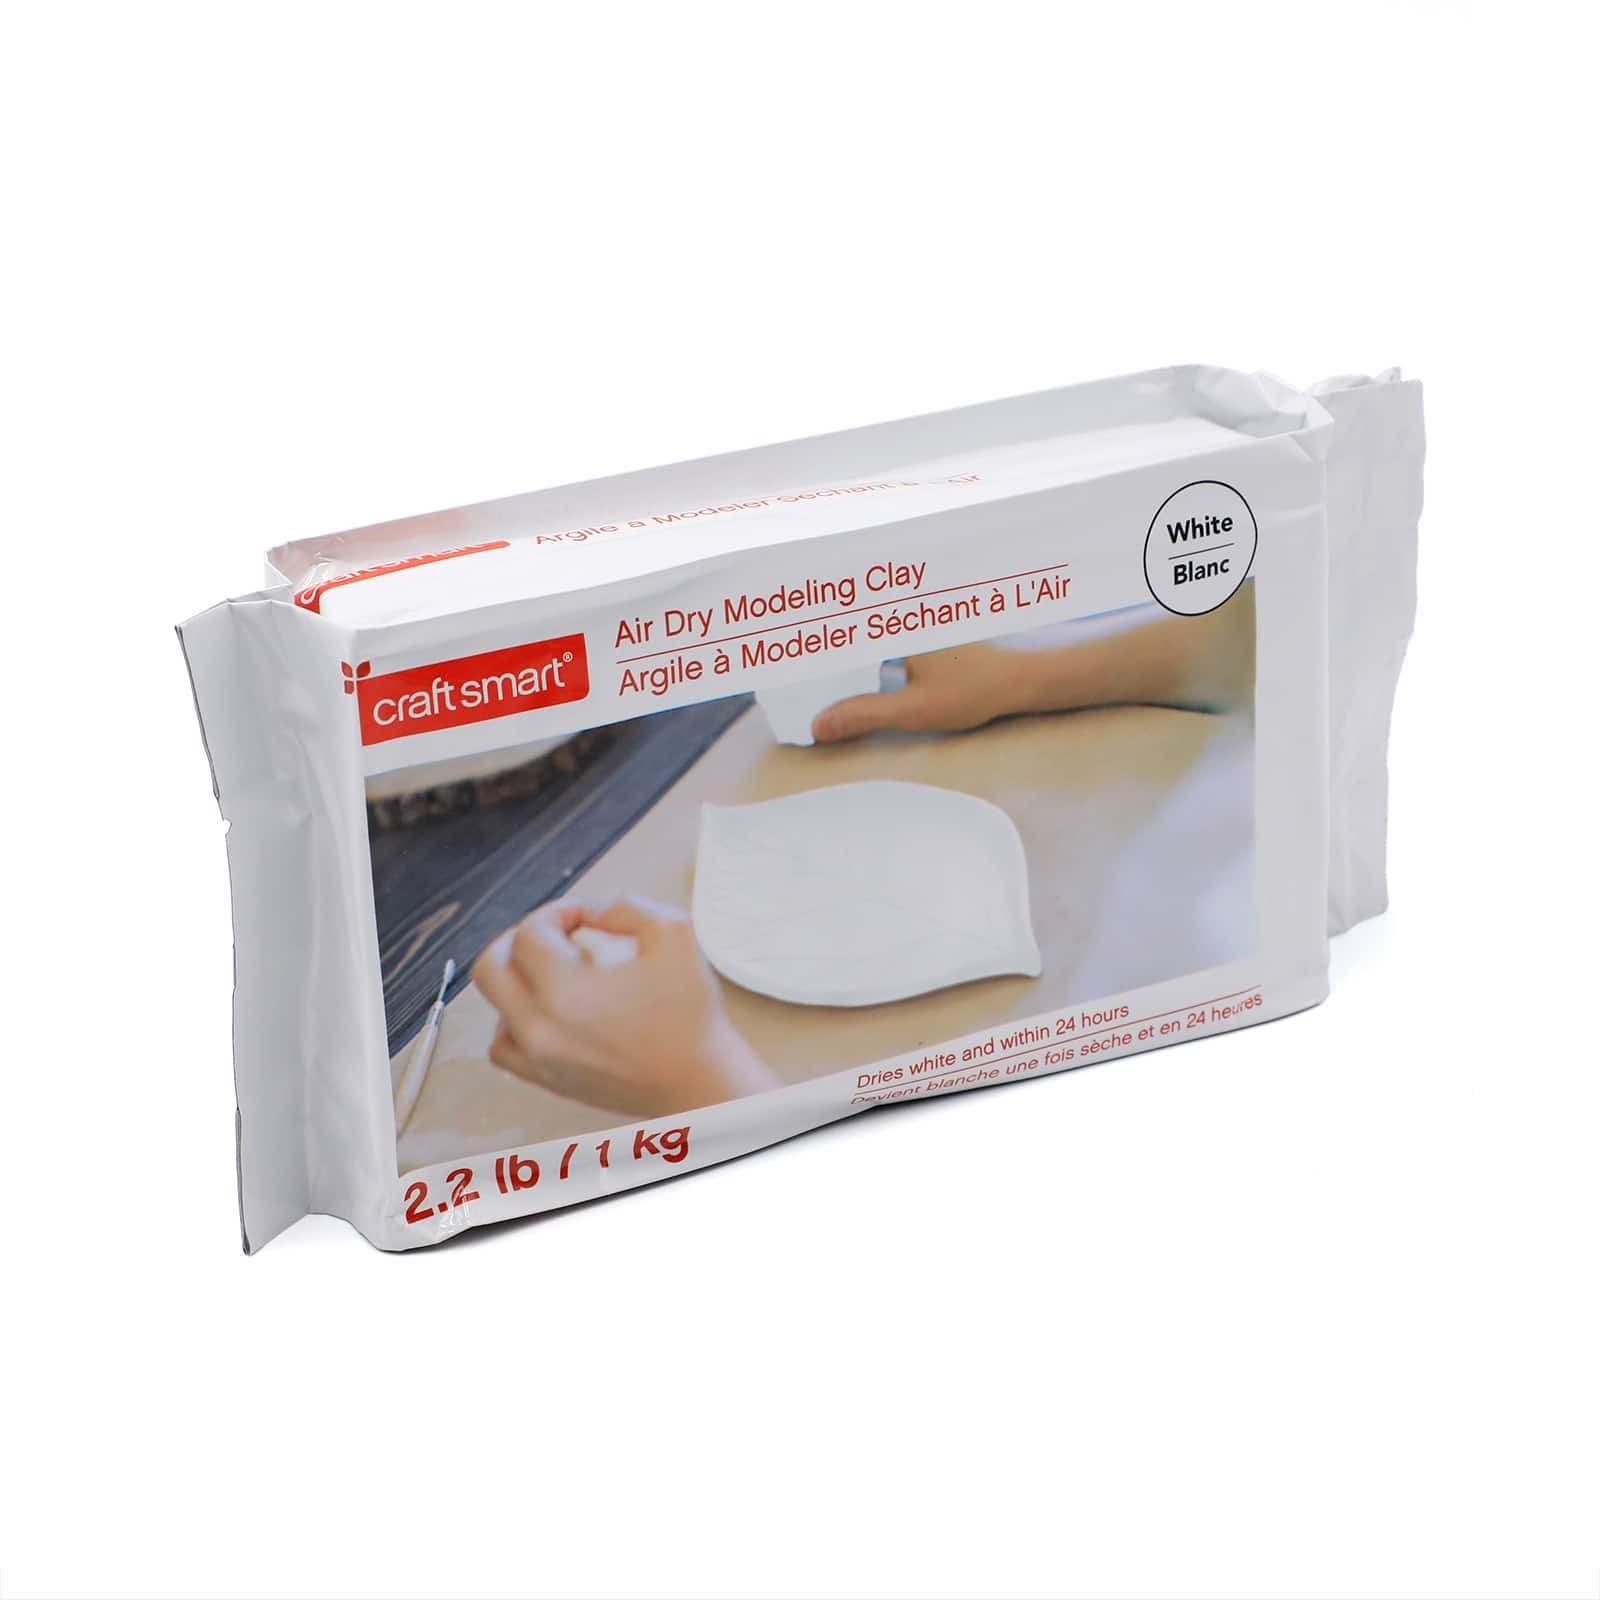 2.2lb. Air Dry Modeling Clay by Craft Smart&#xAE;